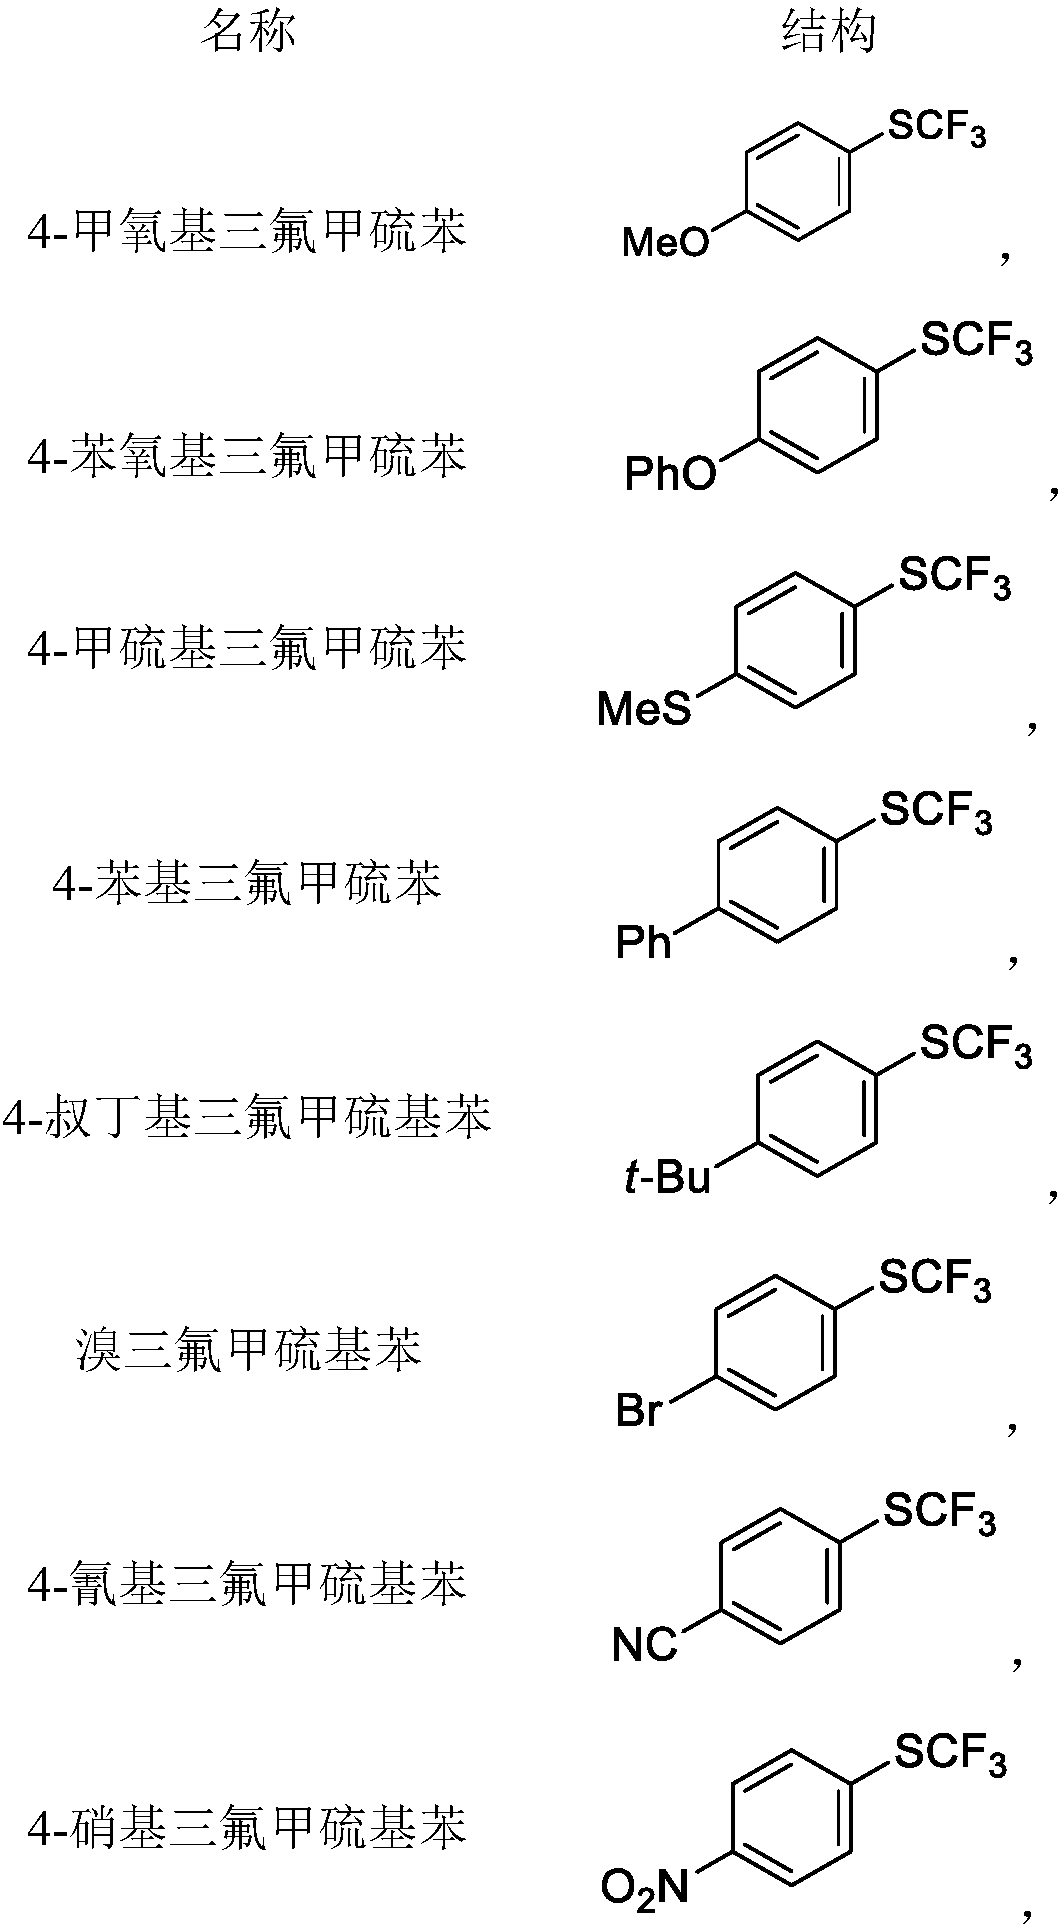 A process for converting substituted phenyl diazonium salts into [(trifluoromethyl)thio]benzene